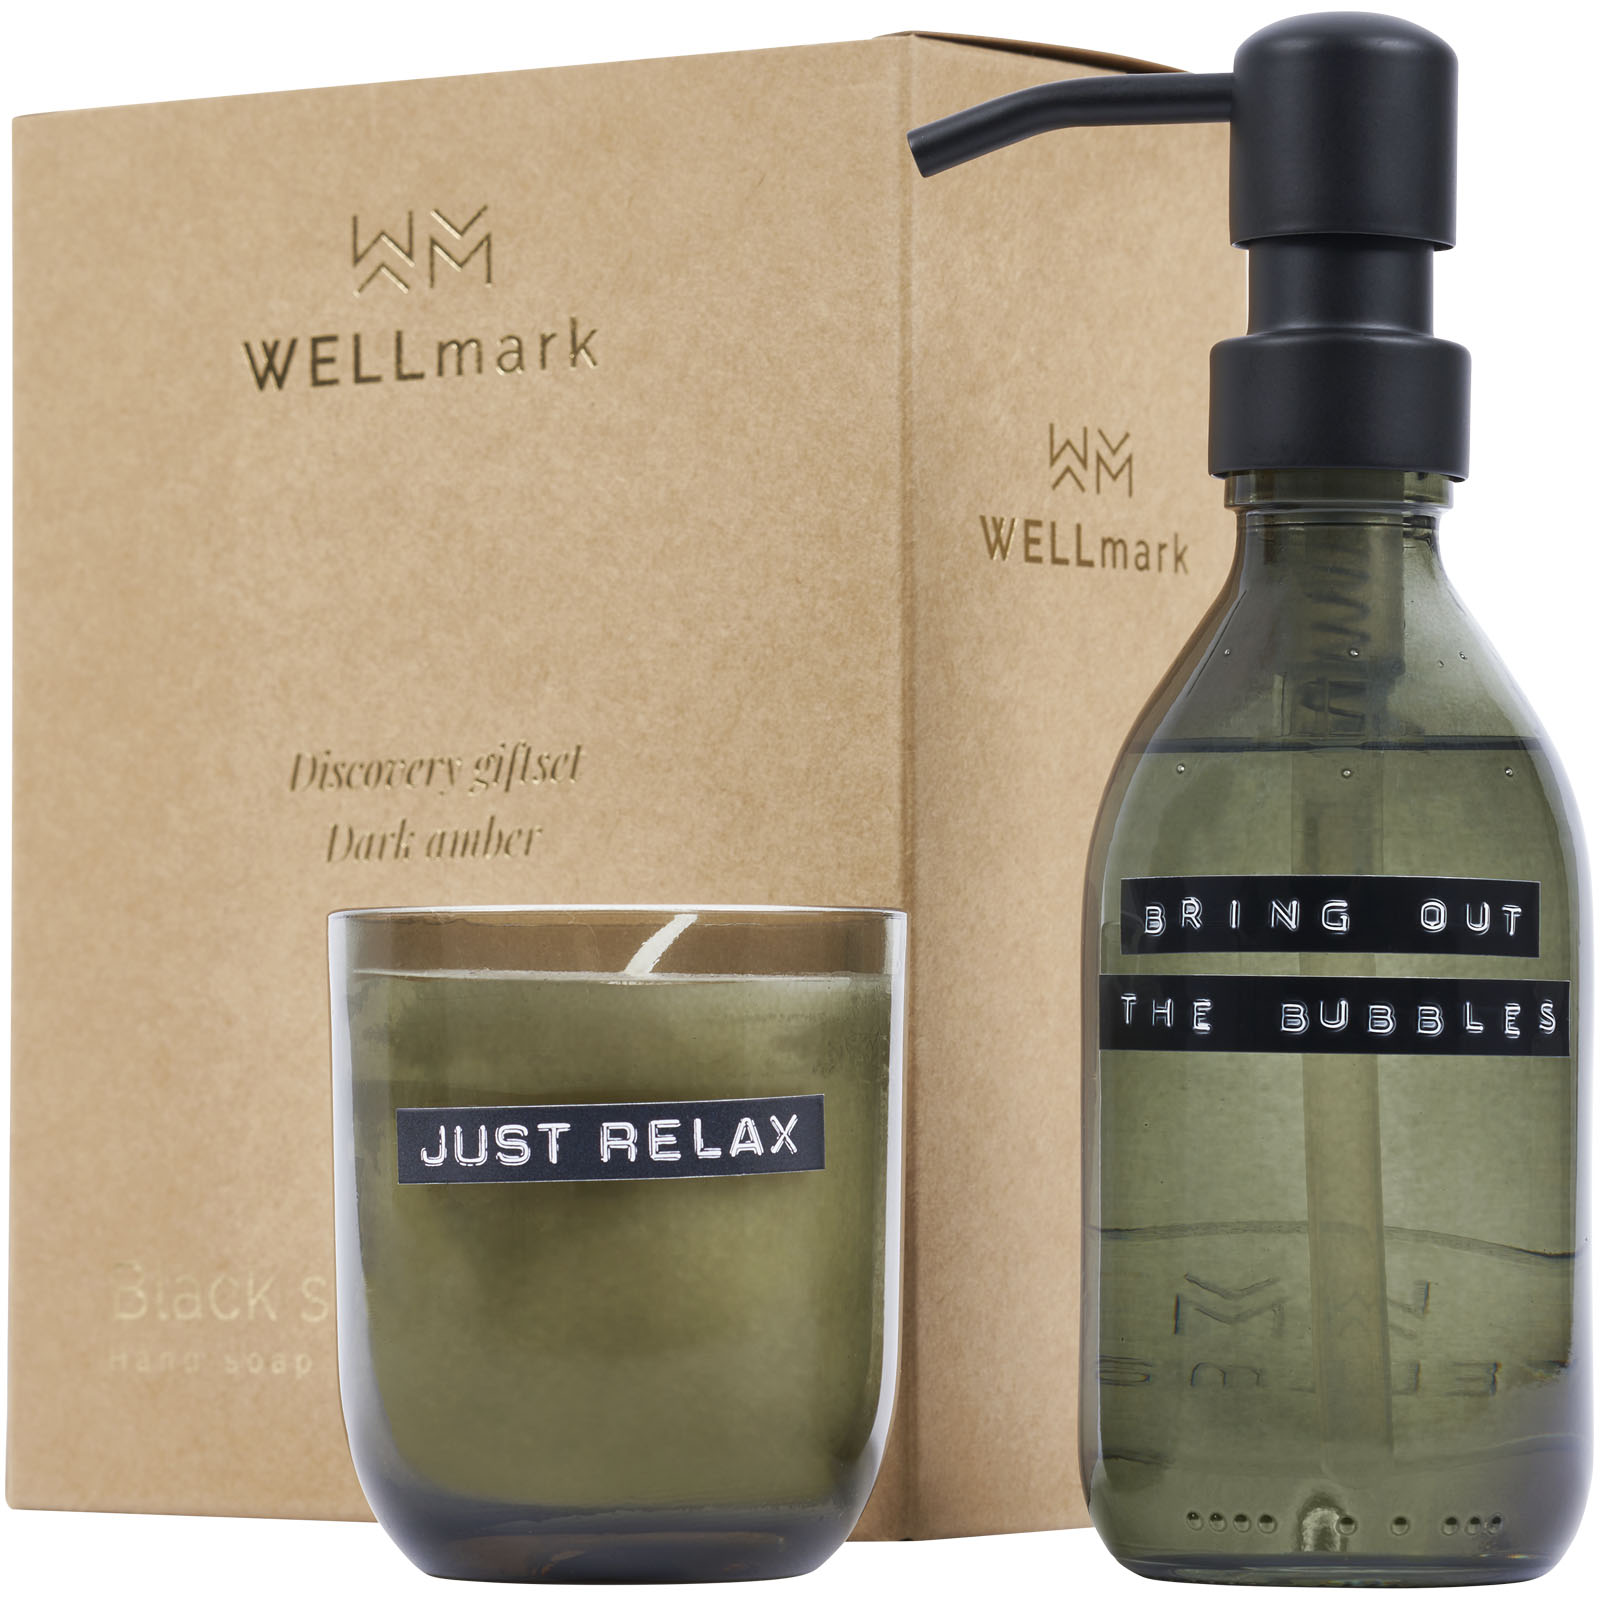 Health & Personal Care - Wellmark Discovery 200 ml hand soap dispenser and 150 g scented candle set - dark amber fragrance